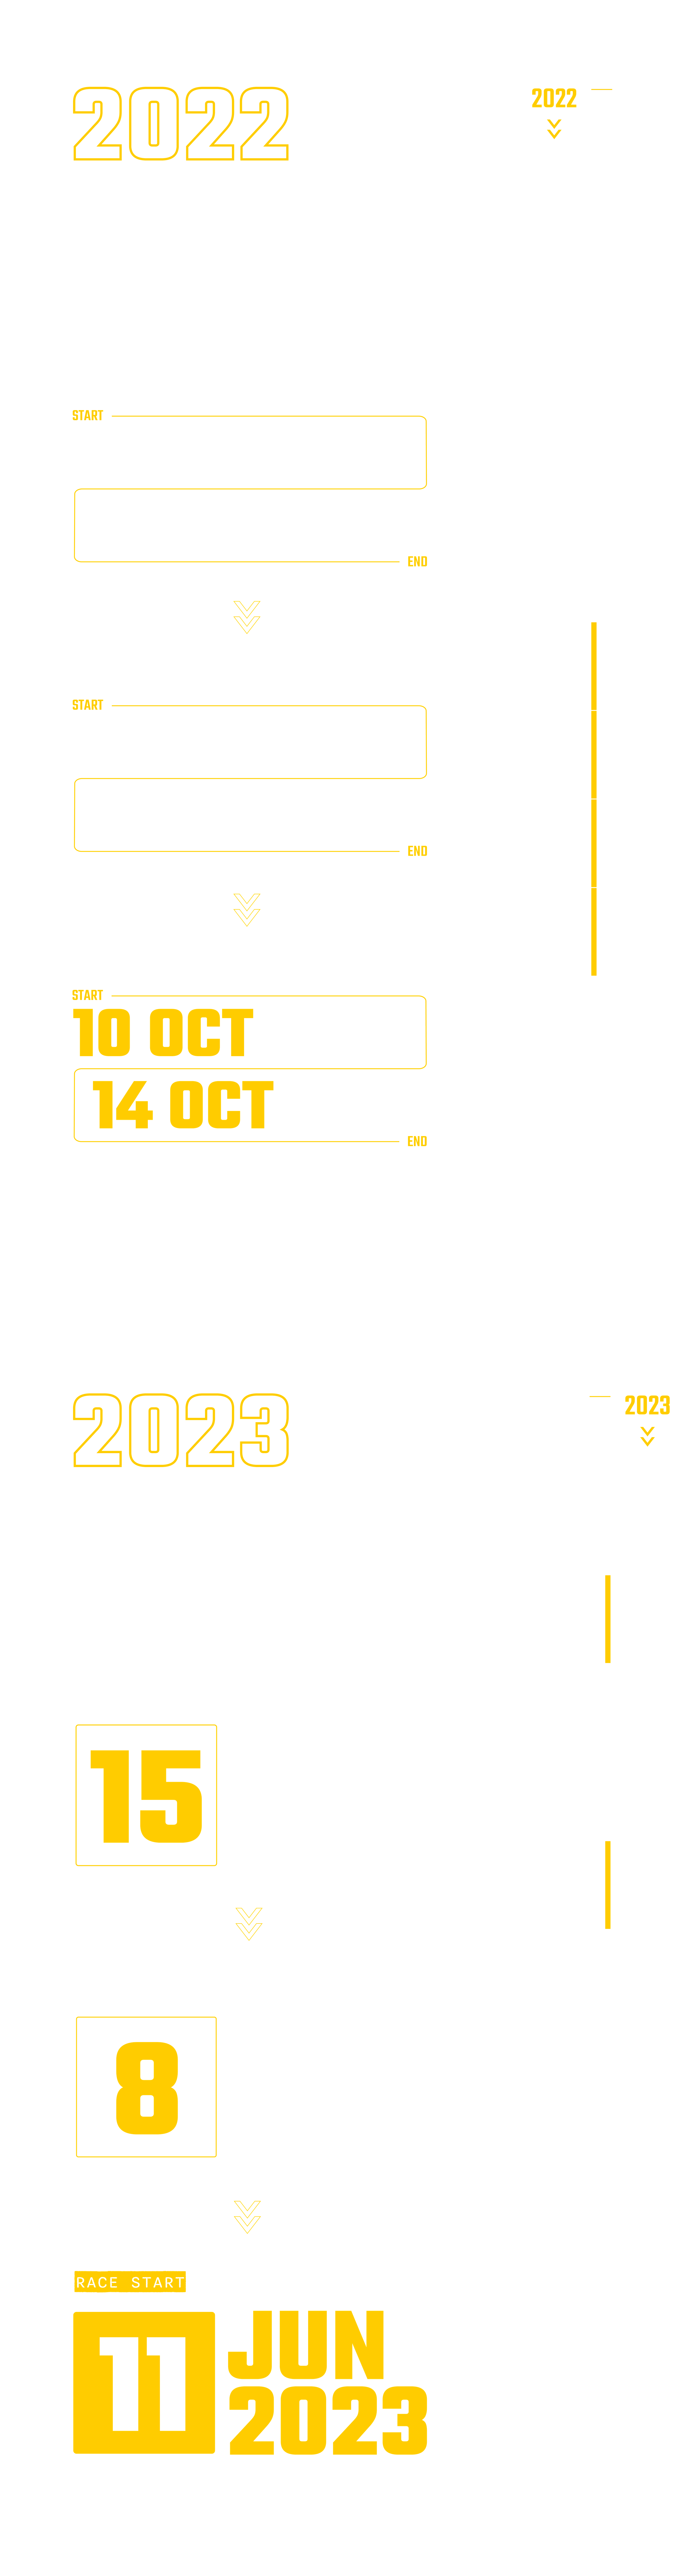 Red Bull X Alps 2023 Infographic Timings mobile